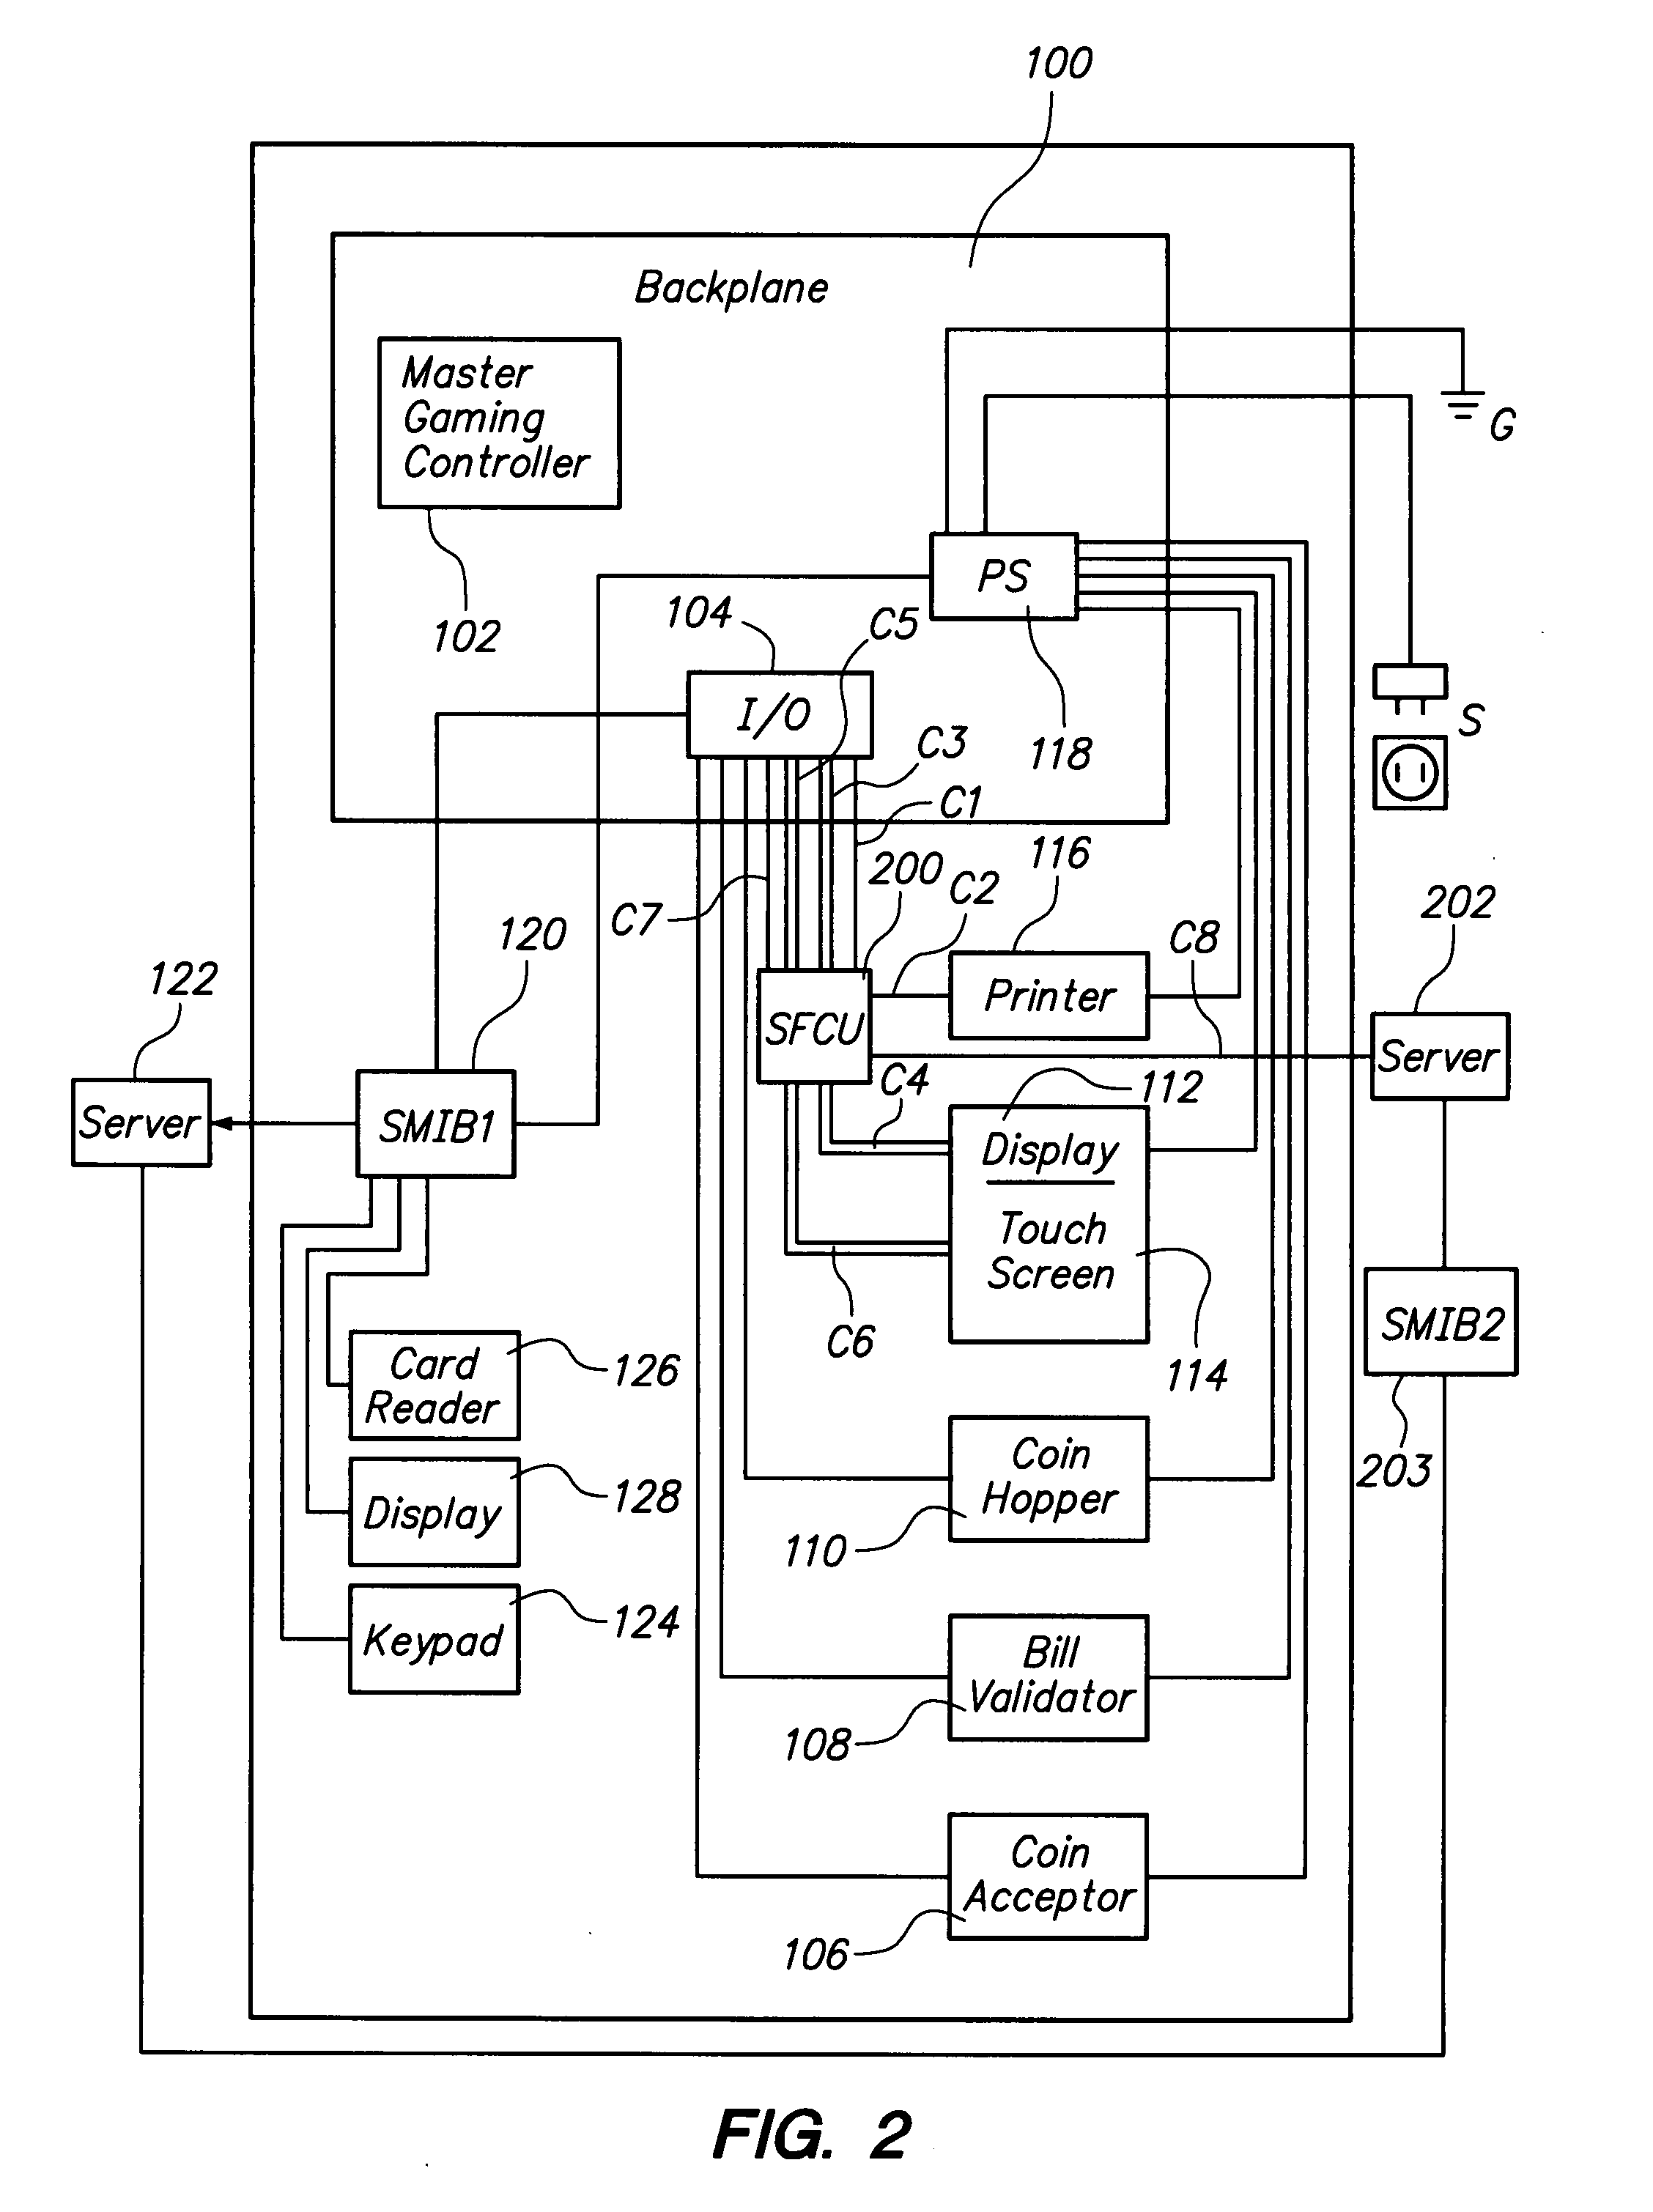 Method and apparatus for providing secondary gaming machine functionality